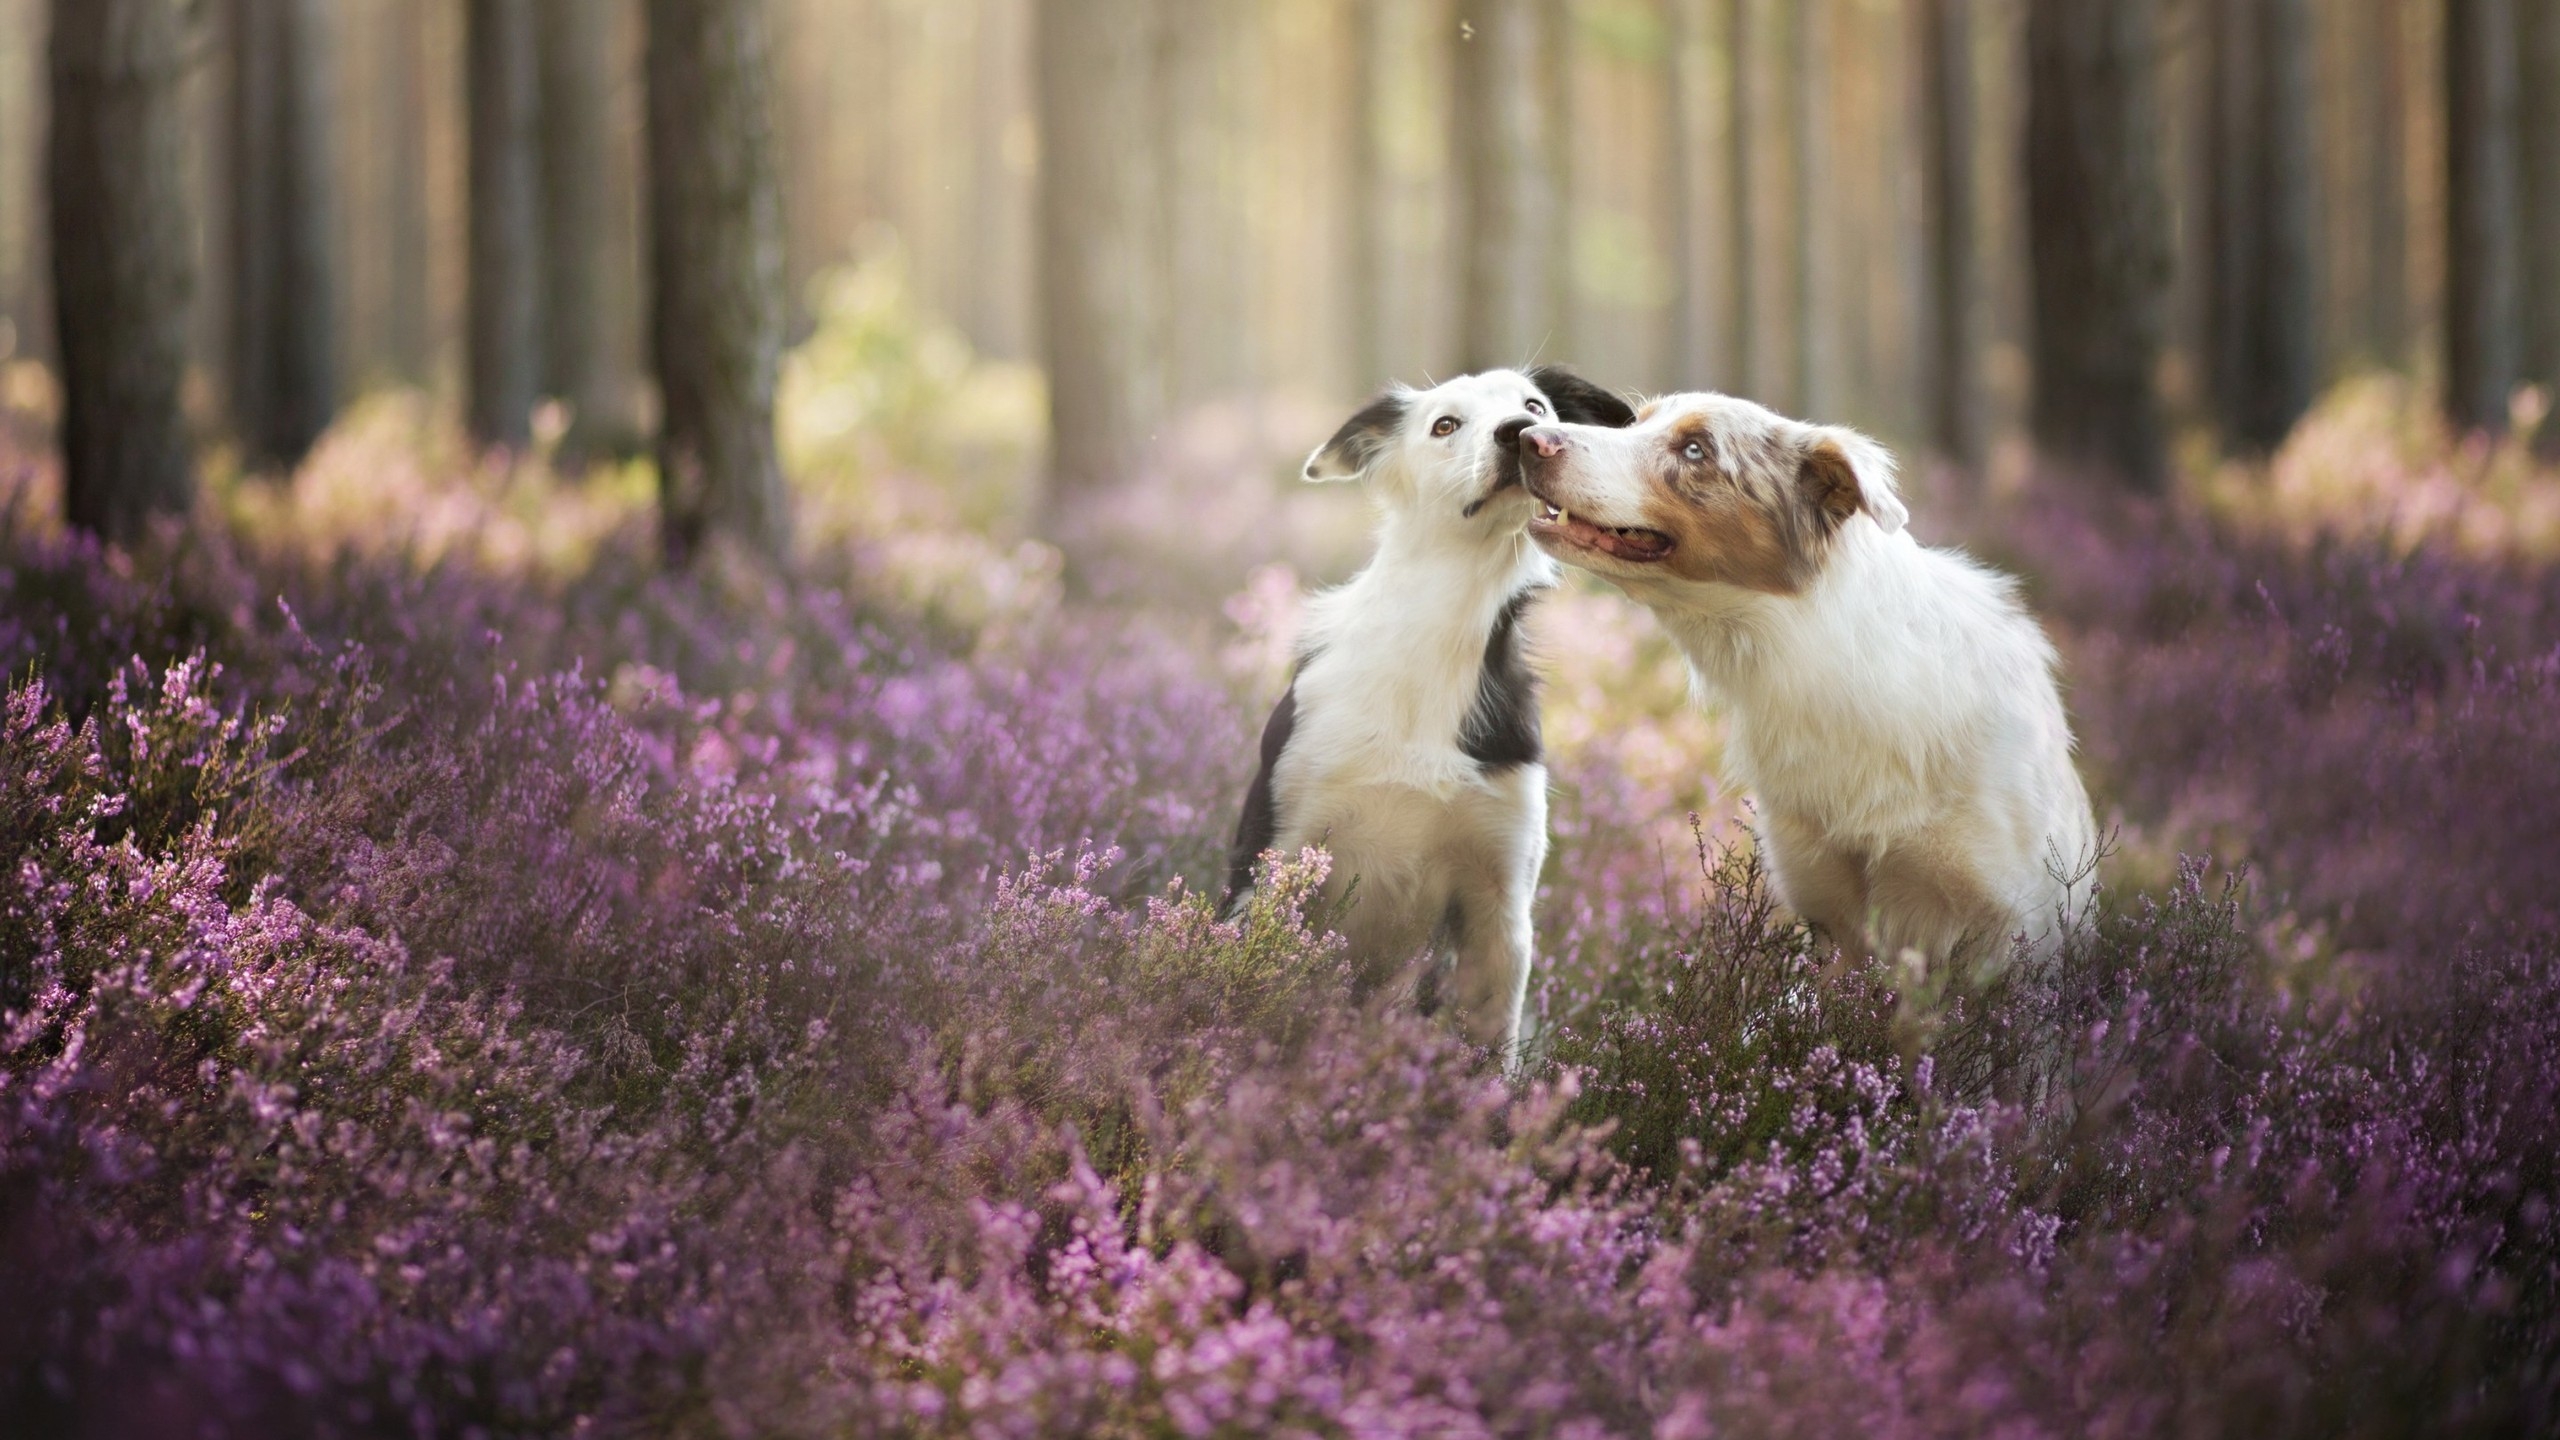 Cute Dogs Playing for 2560x1440 HDTV resolution